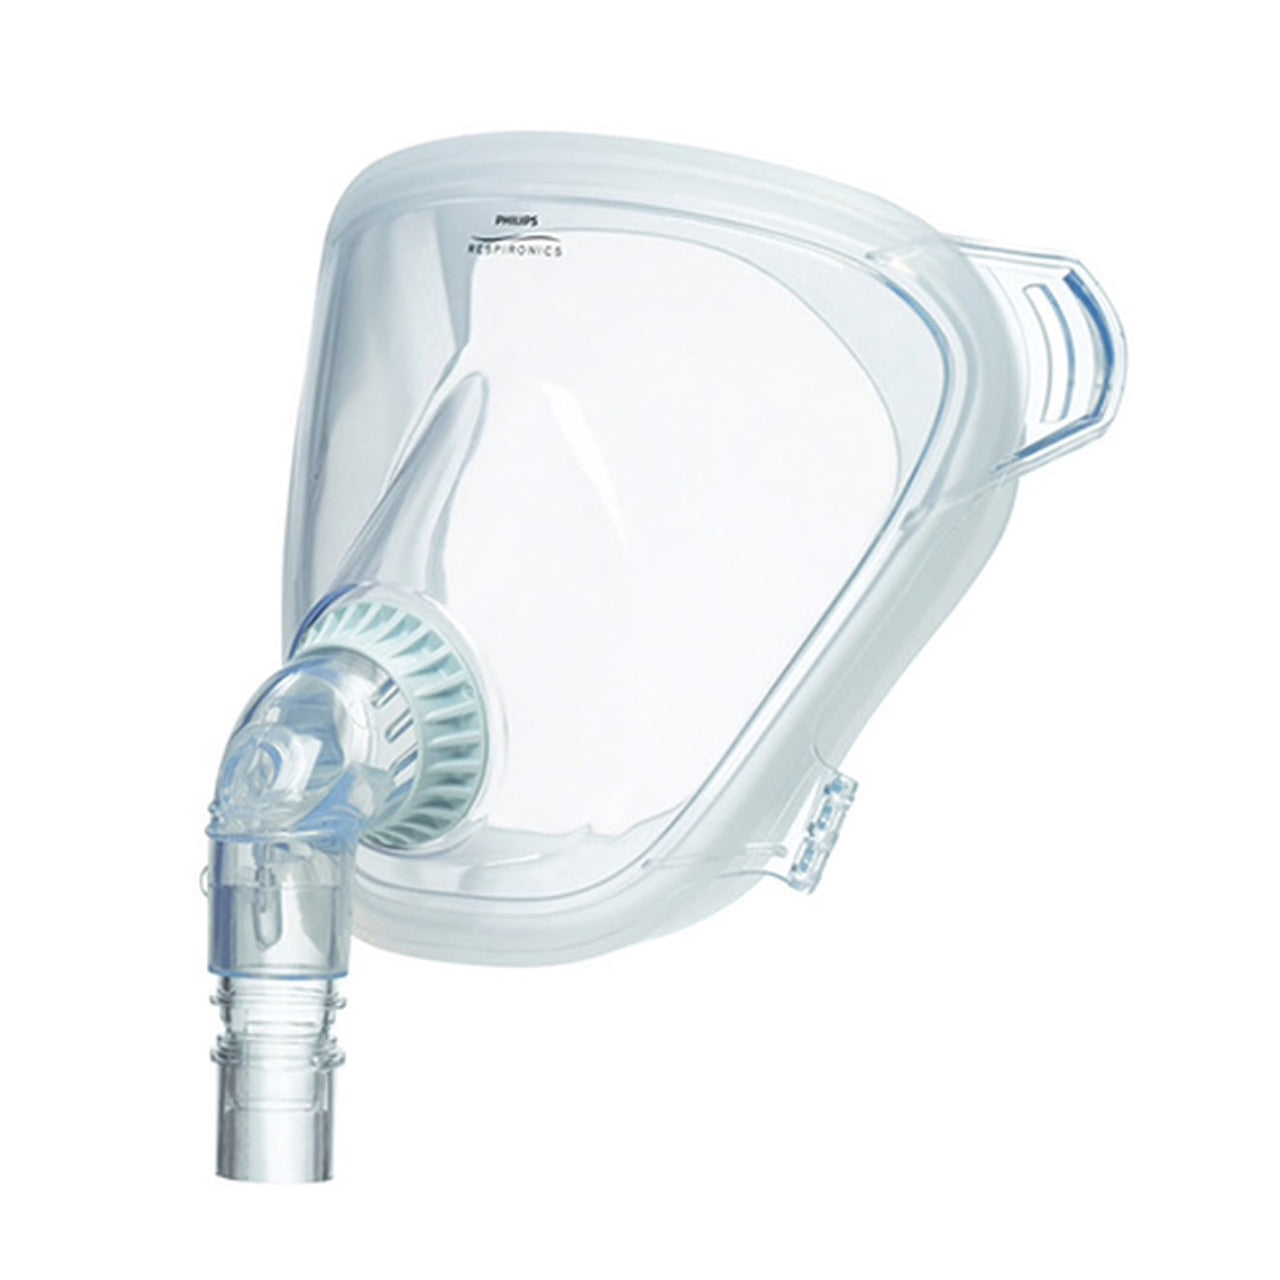 Side view of clear full face mask from FitLife Total Face CPAP Mask by Phillips Respironics.